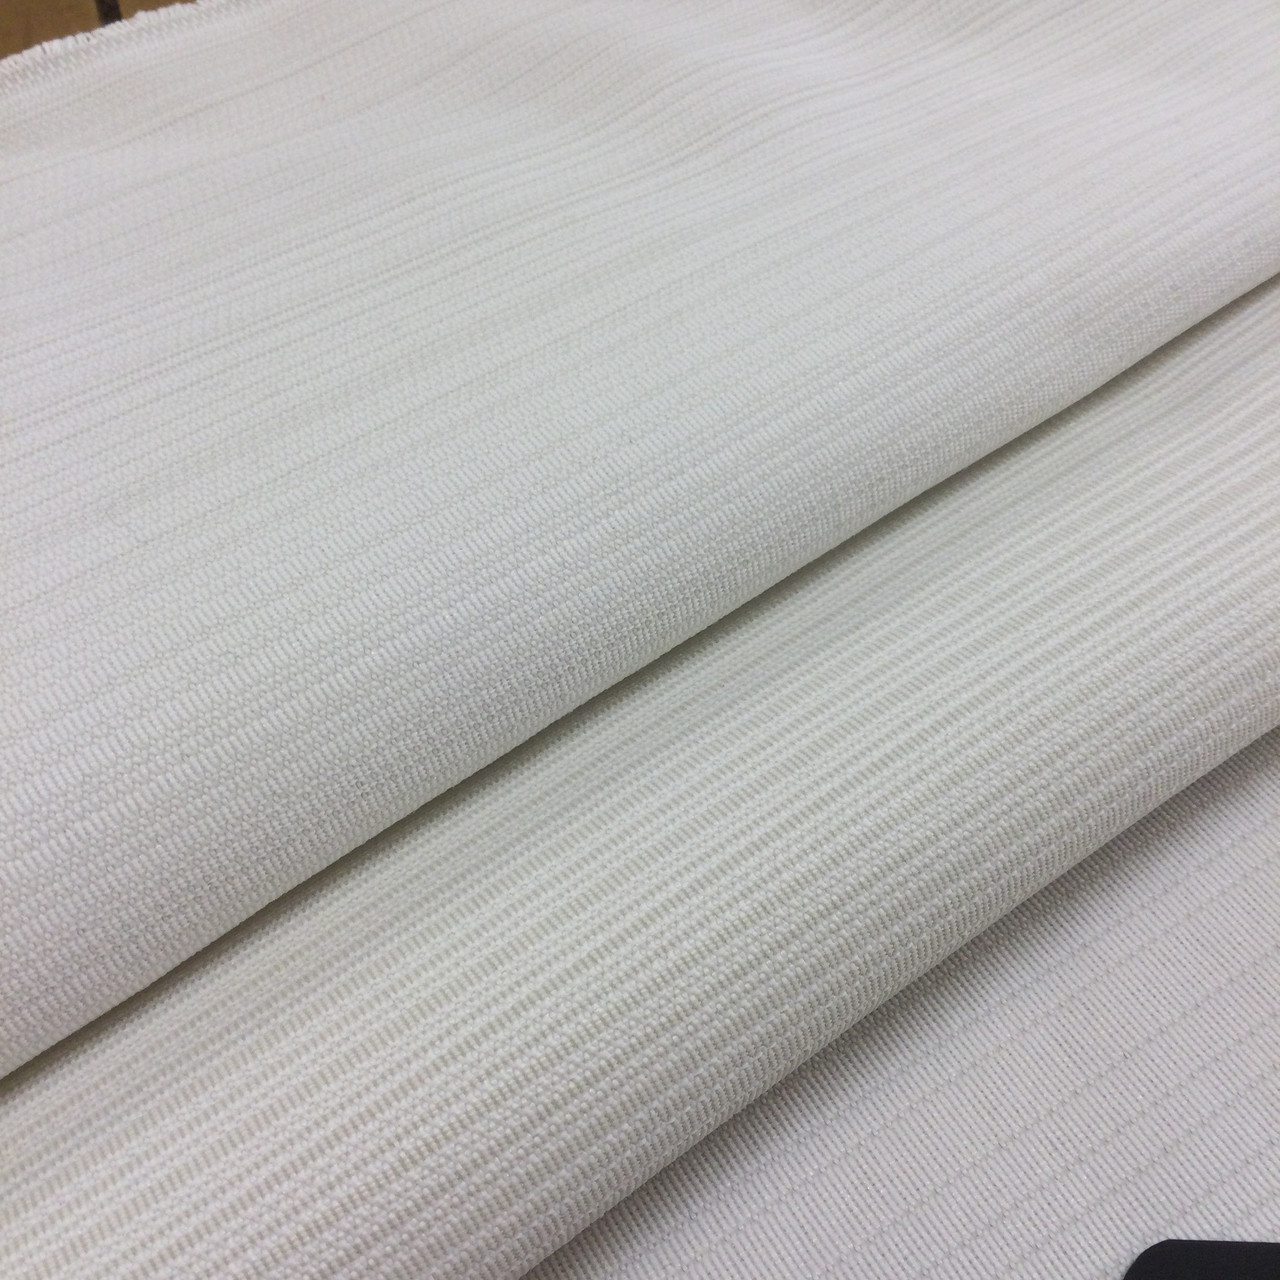 Cream/White Shadow Stripe Upholstery Fabric, Smooth Plain Weav 54 Wide, By The Yard